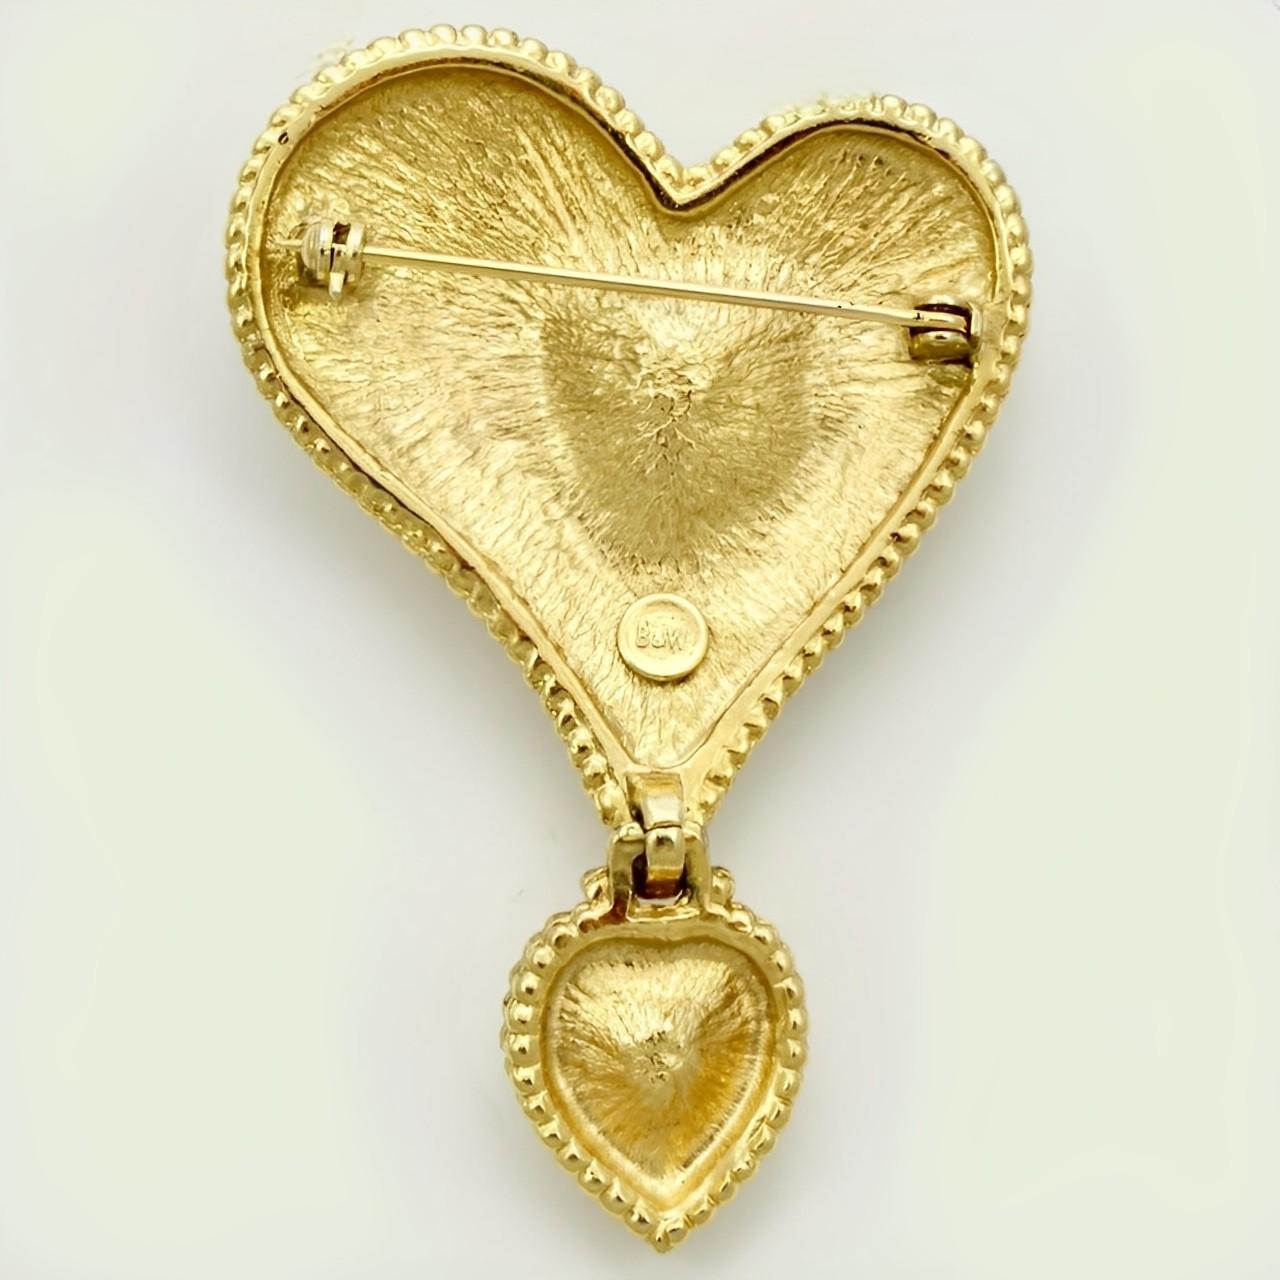 Large vintage Butler & Wilson gold plated double heart textured brooch, embellished with clear crystals. Circa 1980s. Measuring length 7.2 cm / 2.8 inches by maximum width 4.75 cm / 1.87 inches. The brooch is in very good condition. It will arrive